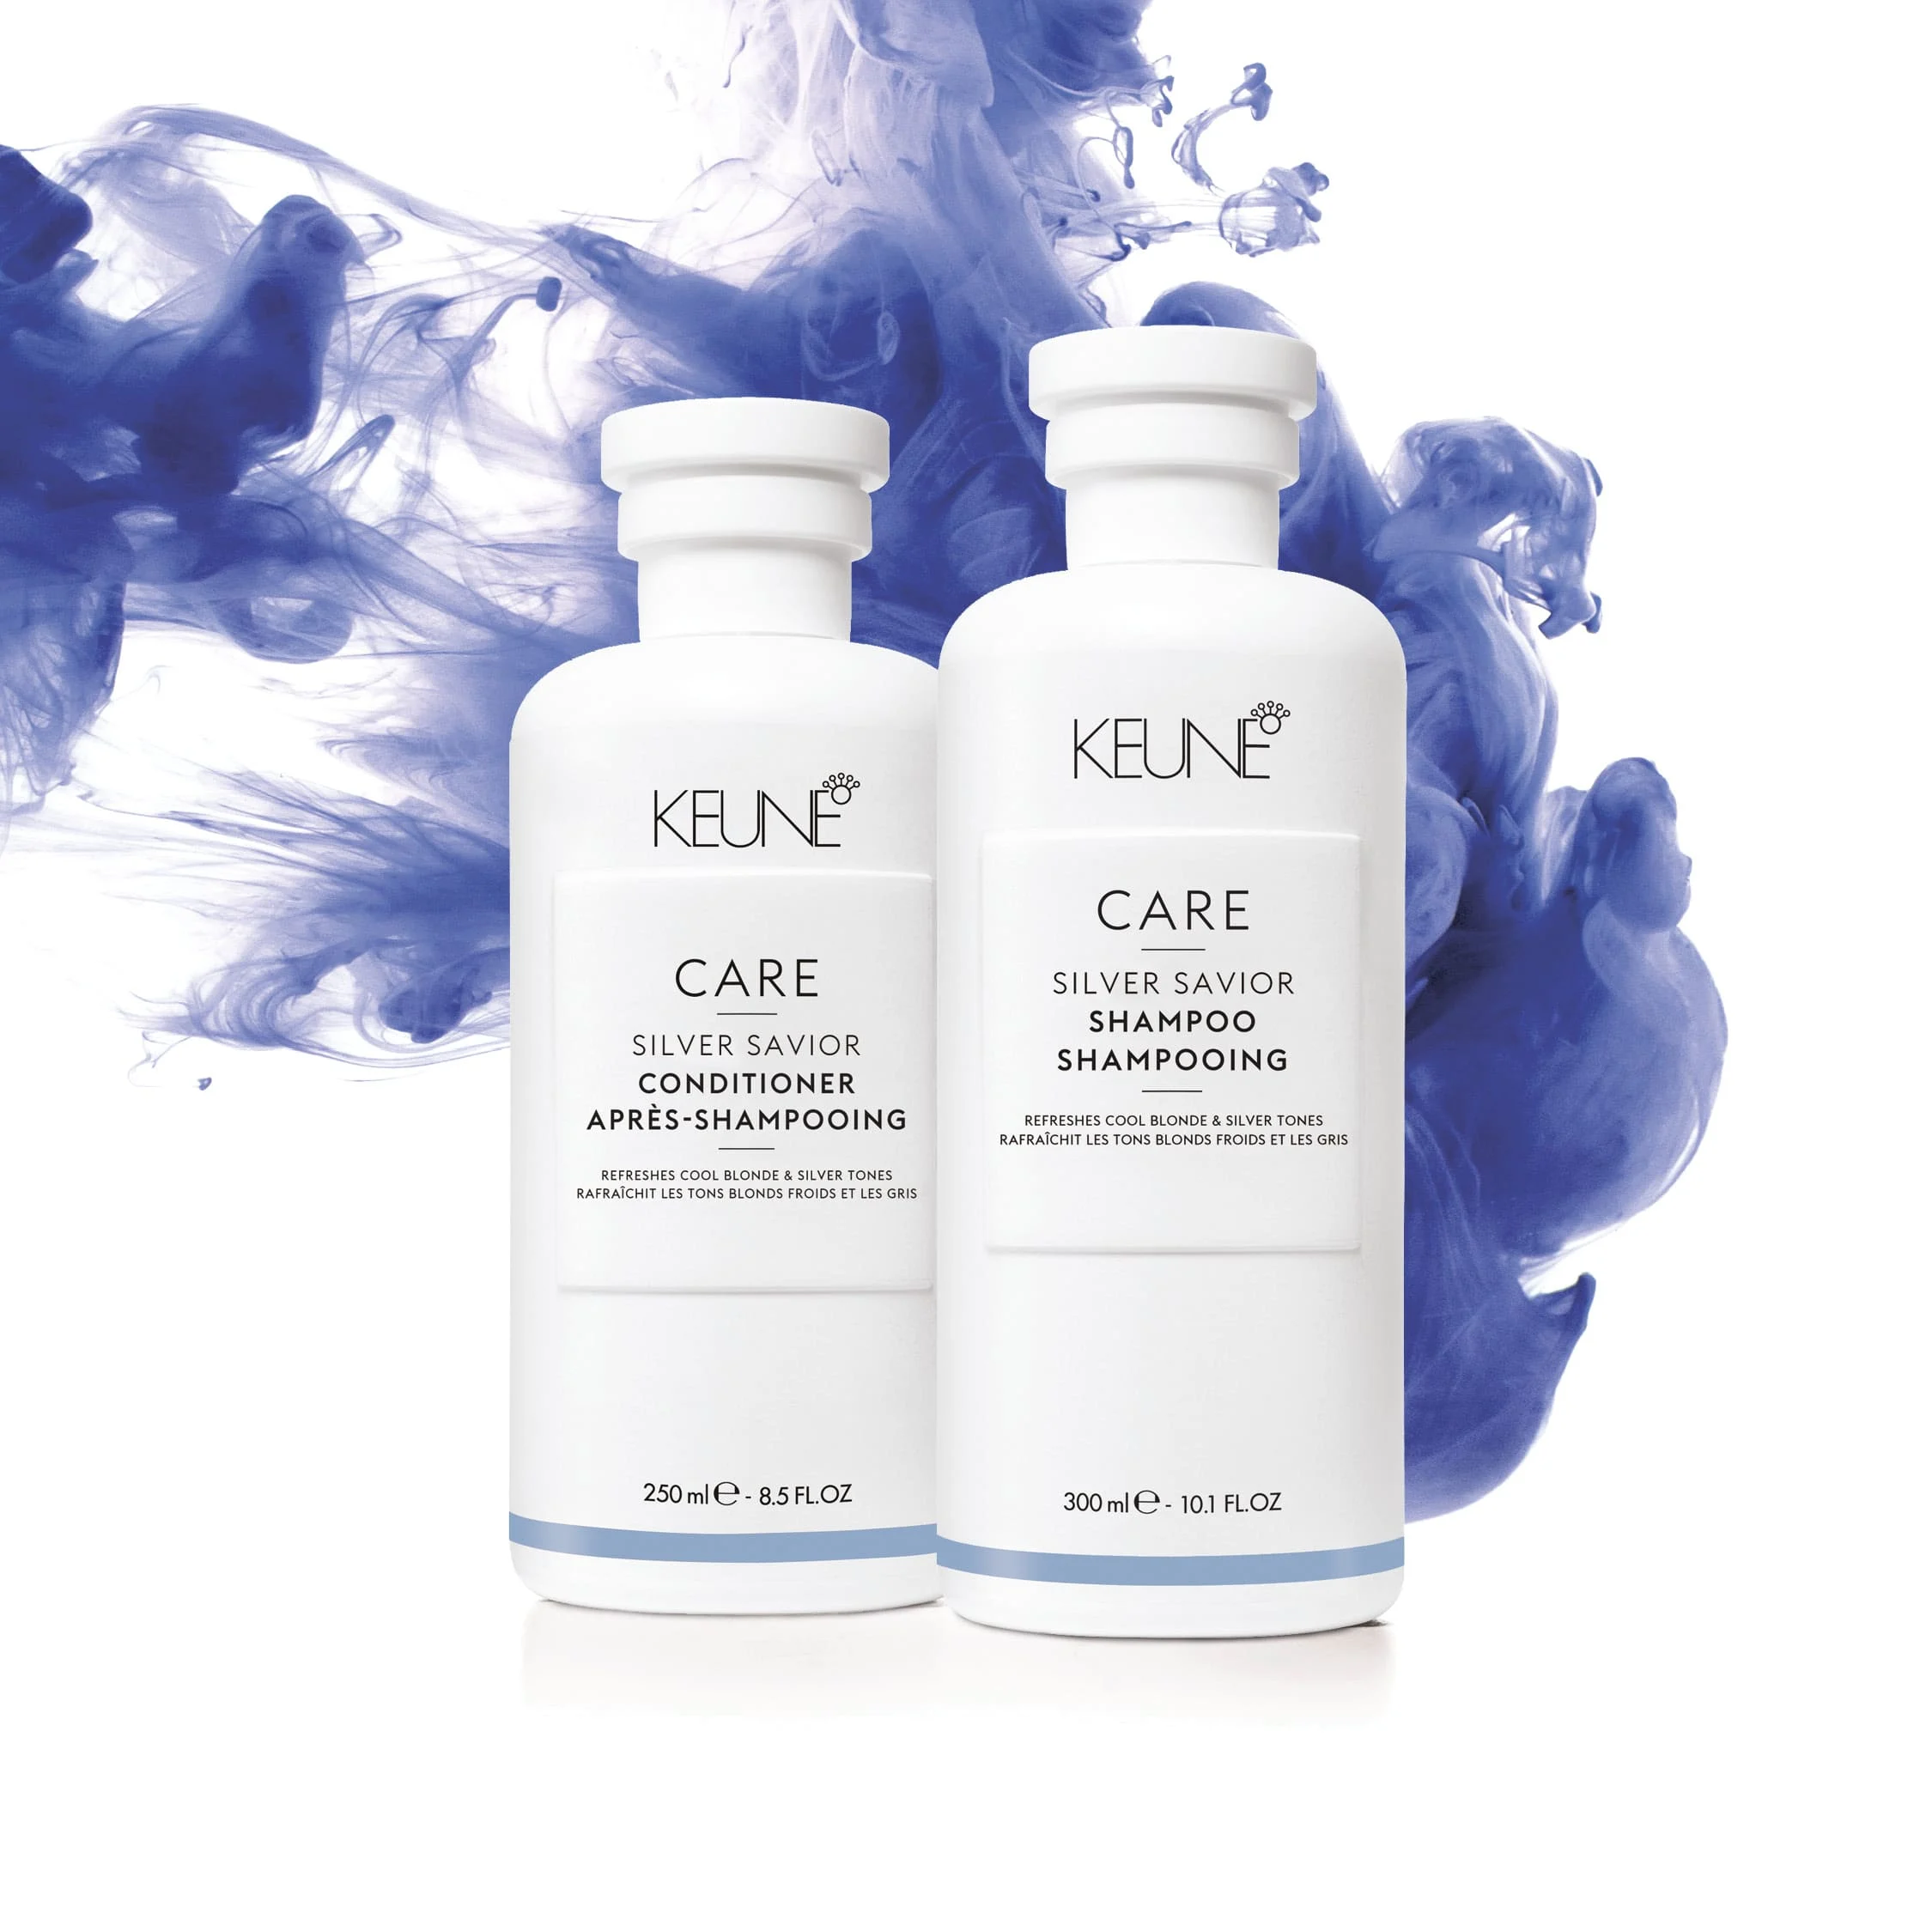 Image of bottles Keune Care Silver Savior Shampoo and Conditioner with 